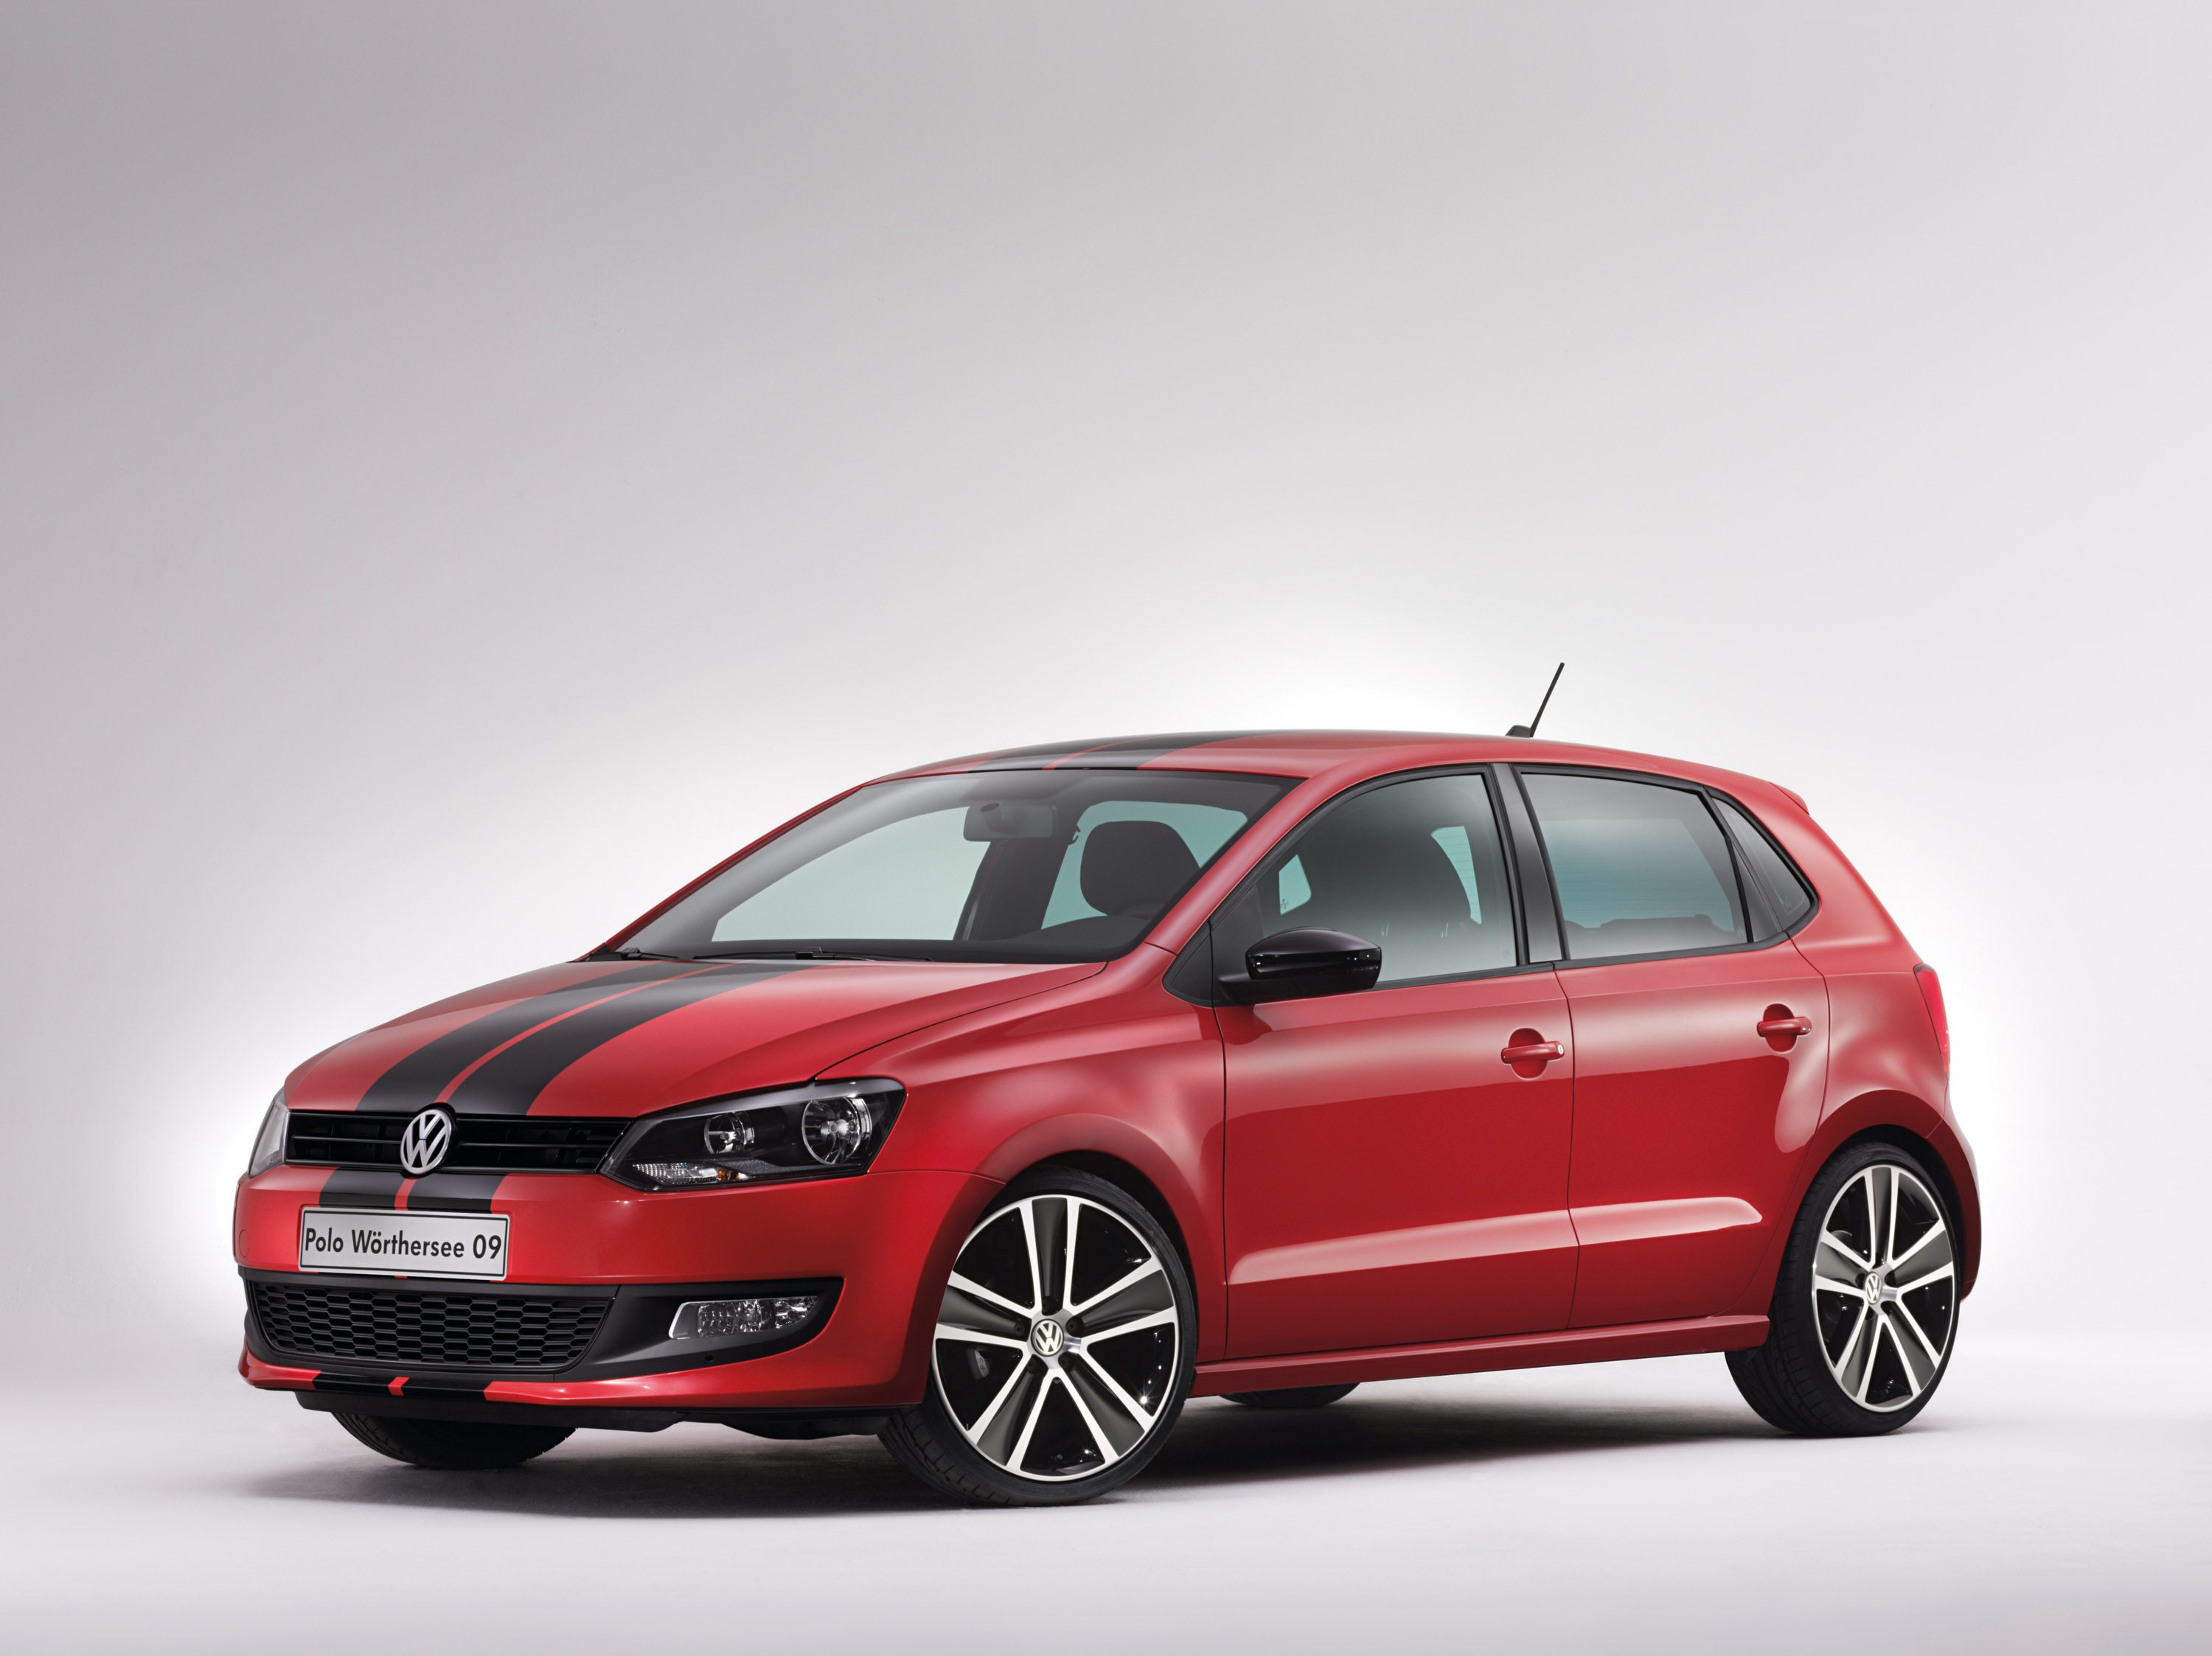 Volkswagen Polo Worthersee 09 Concept